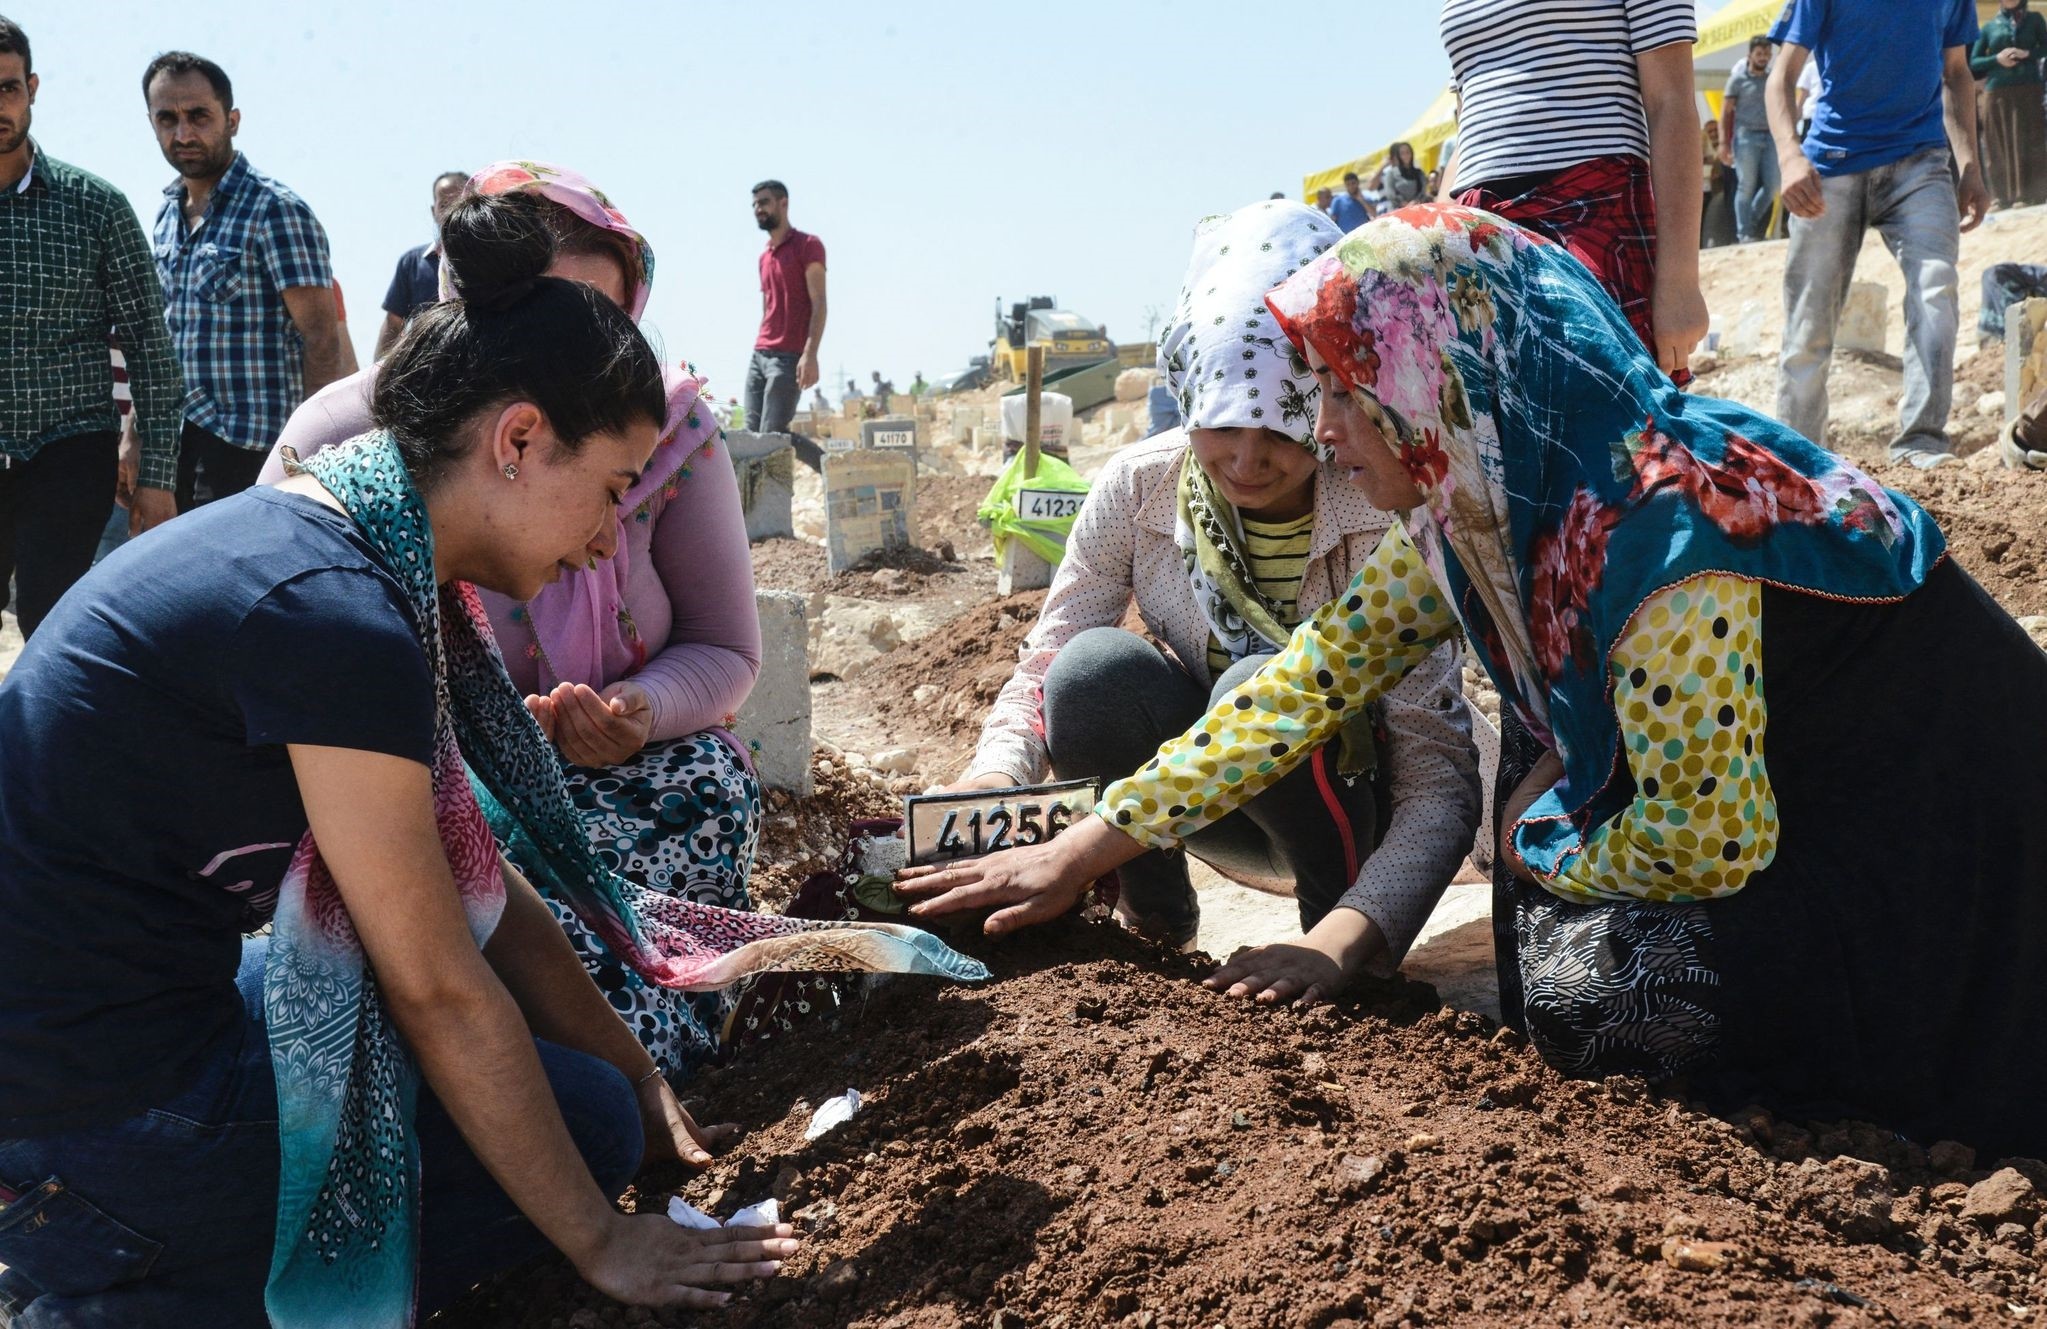 Women gesture as they kneel by a grave at a cemetery during the funeral for the victims of last night's attack on a wedding party that left 50 dead in Gaziantep in southeastern Turke on August 21, 2016. (AFP Photo)